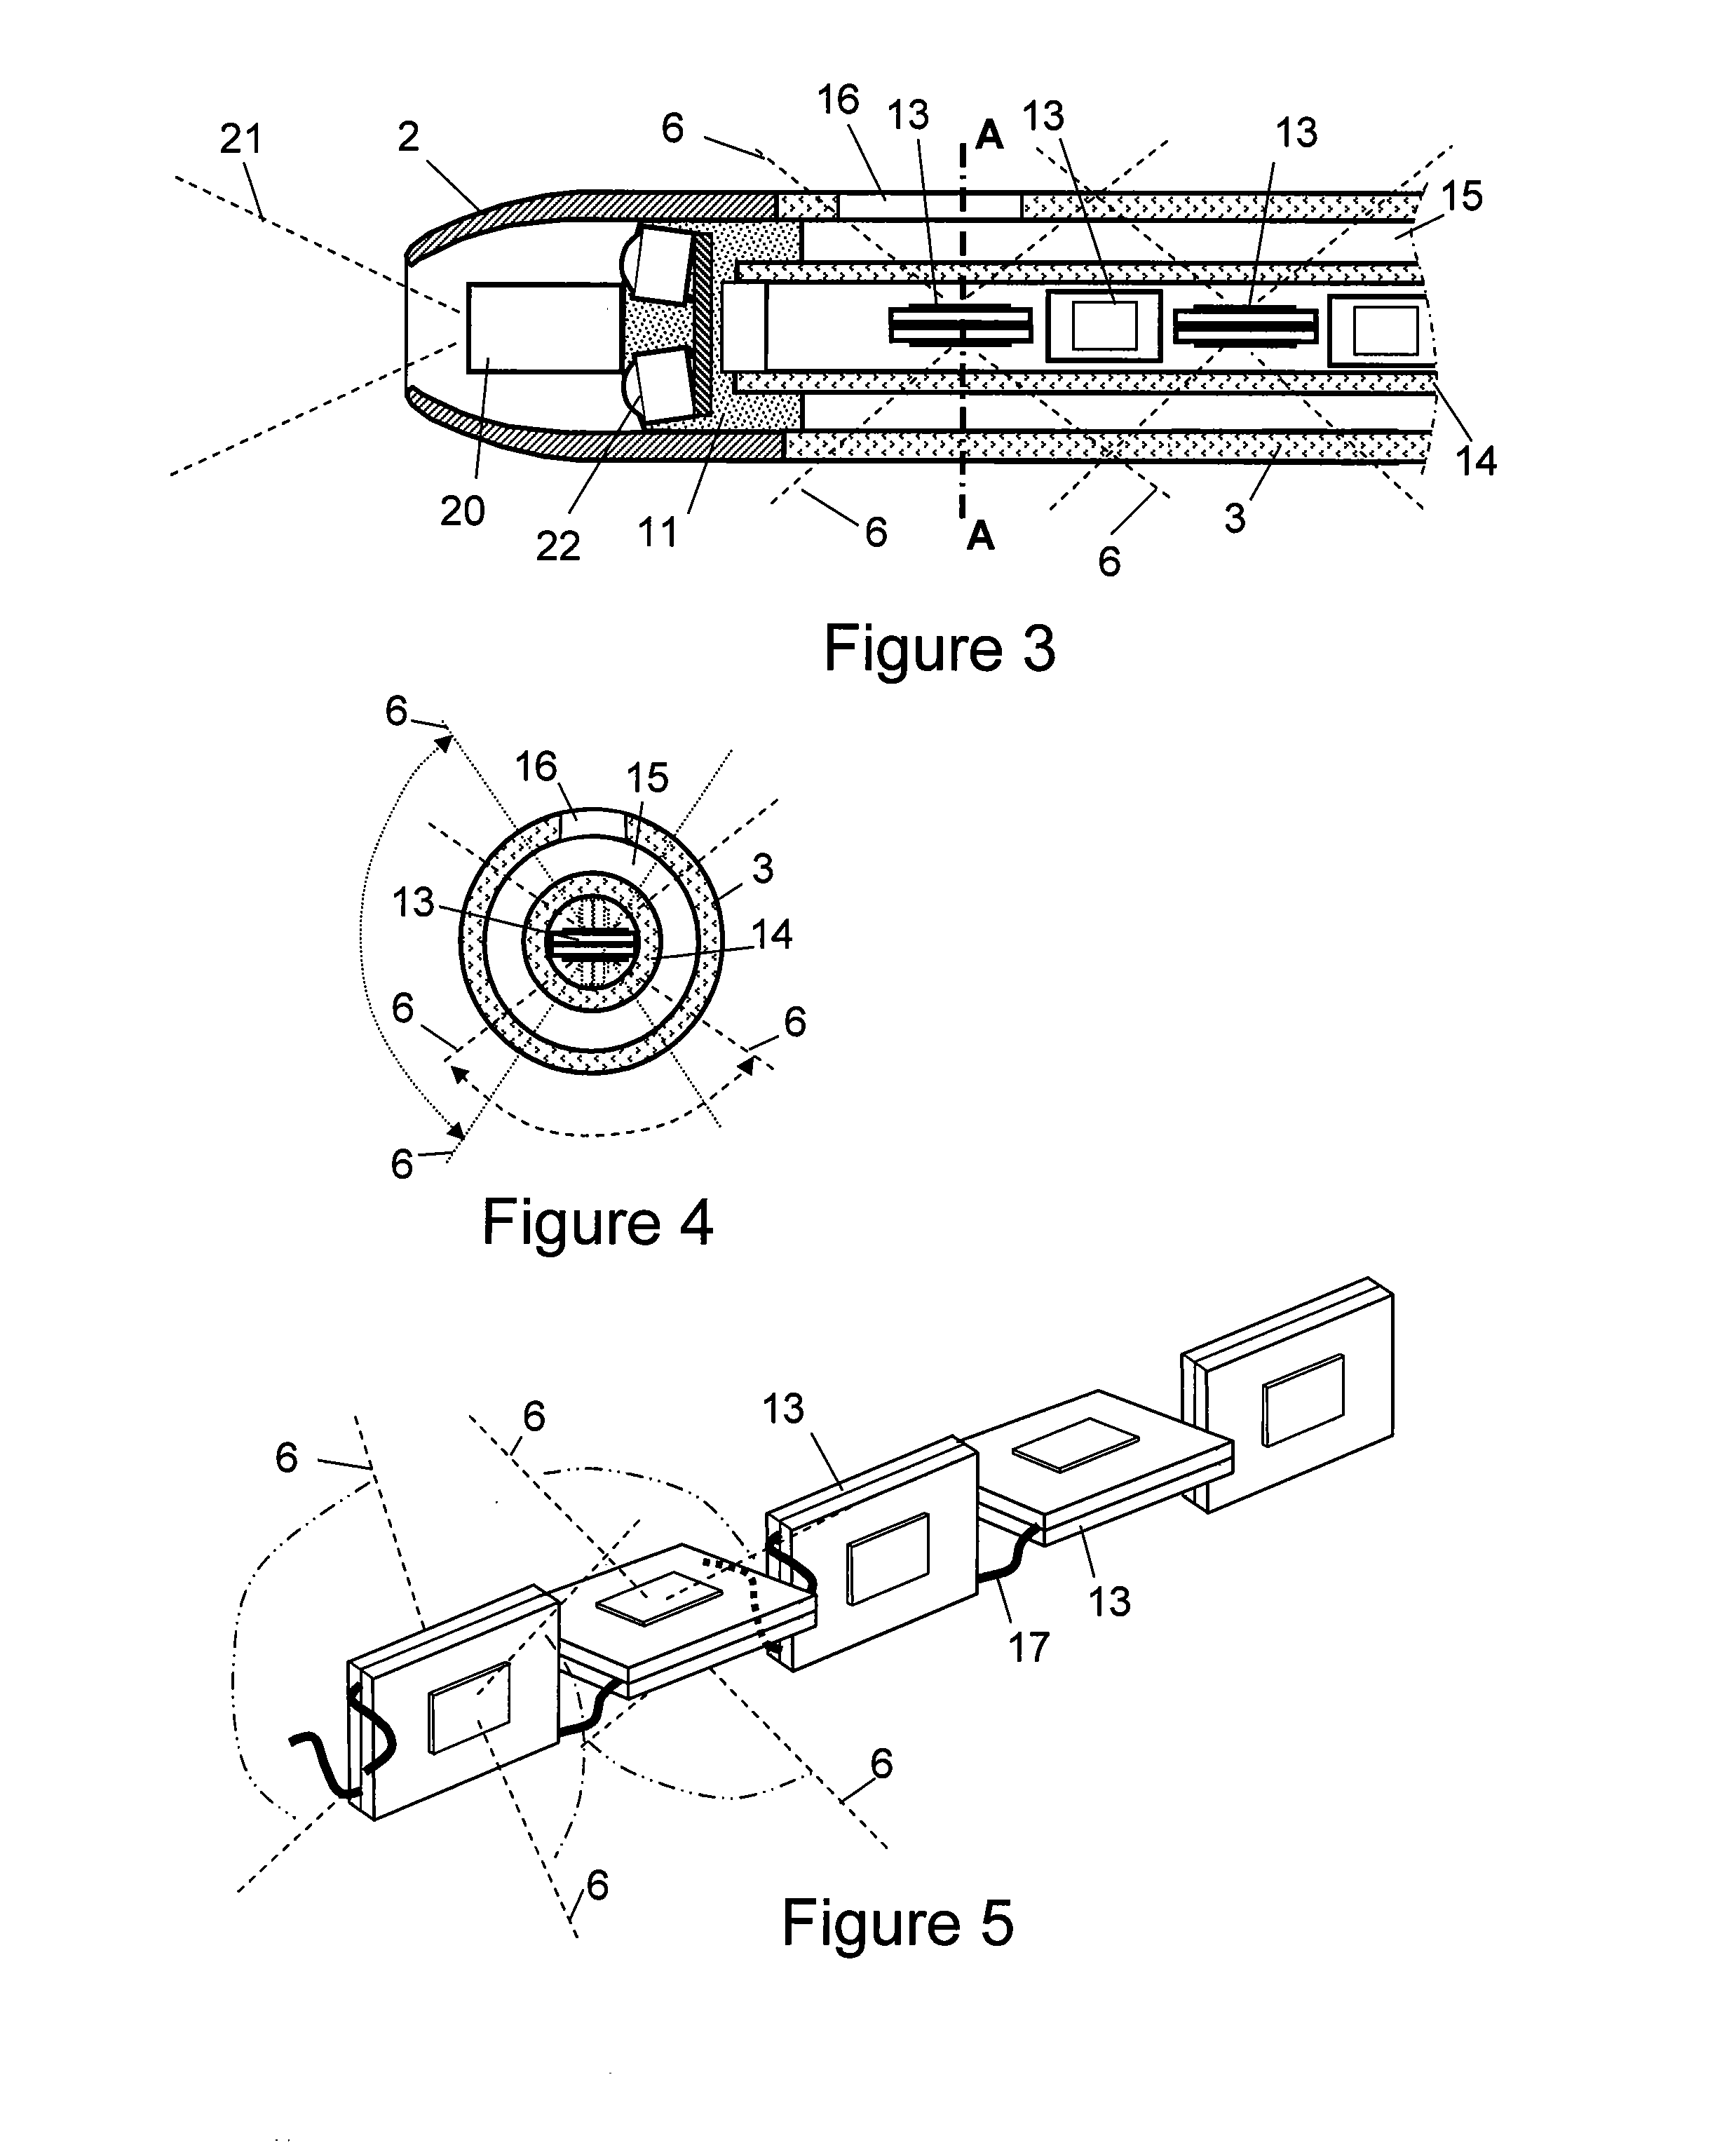 Medical device and method for internal healing and antimicrobial purposes